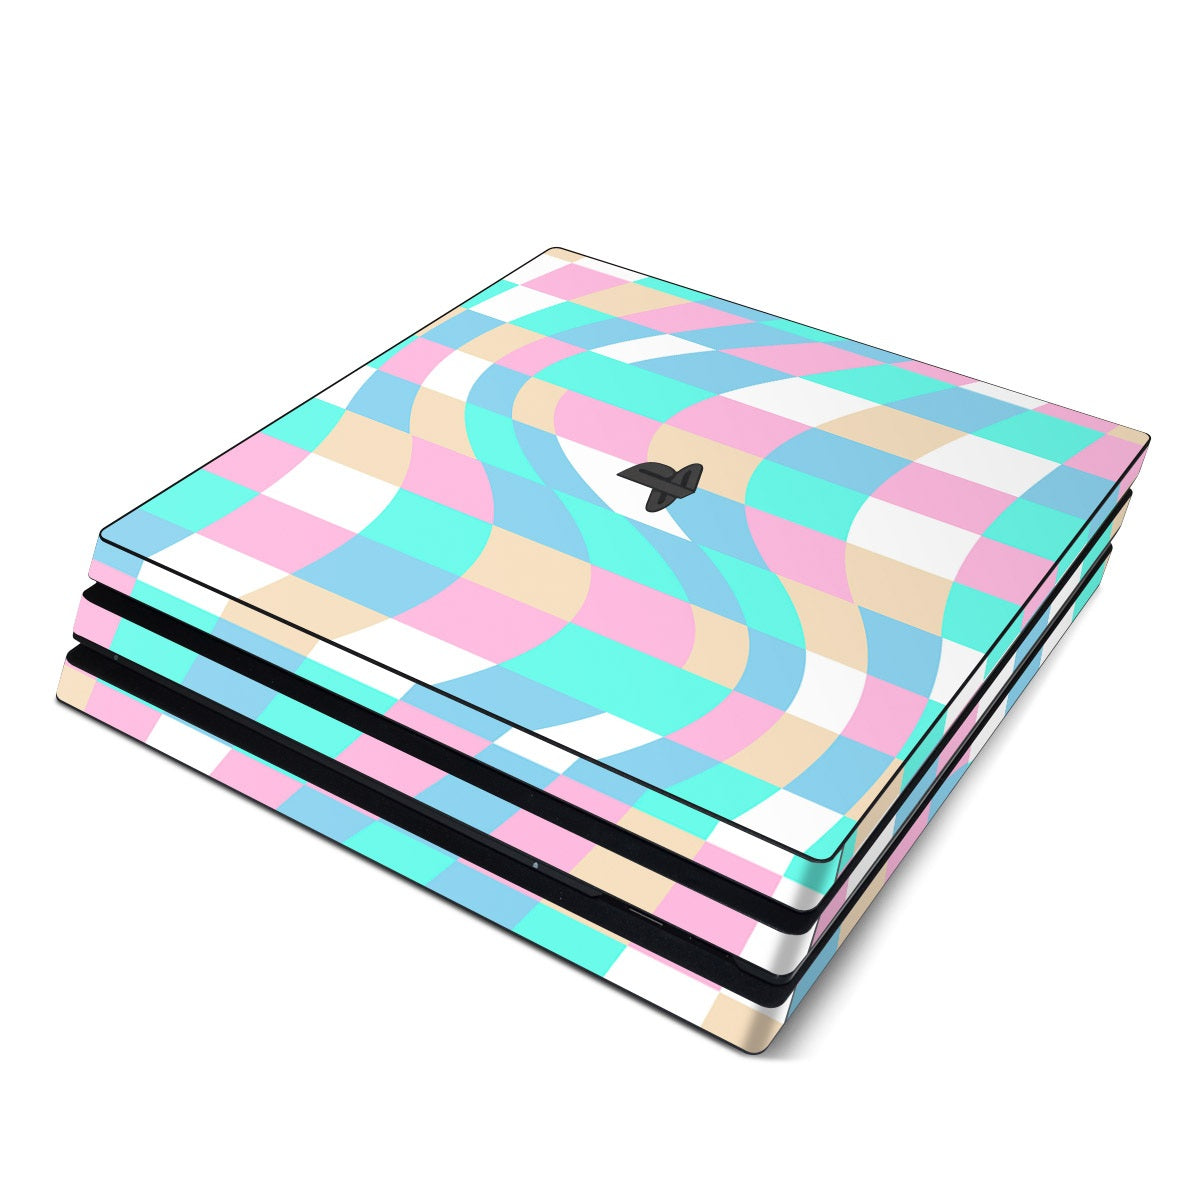 Bold Forms Cool - Sony PS4 Pro Skin